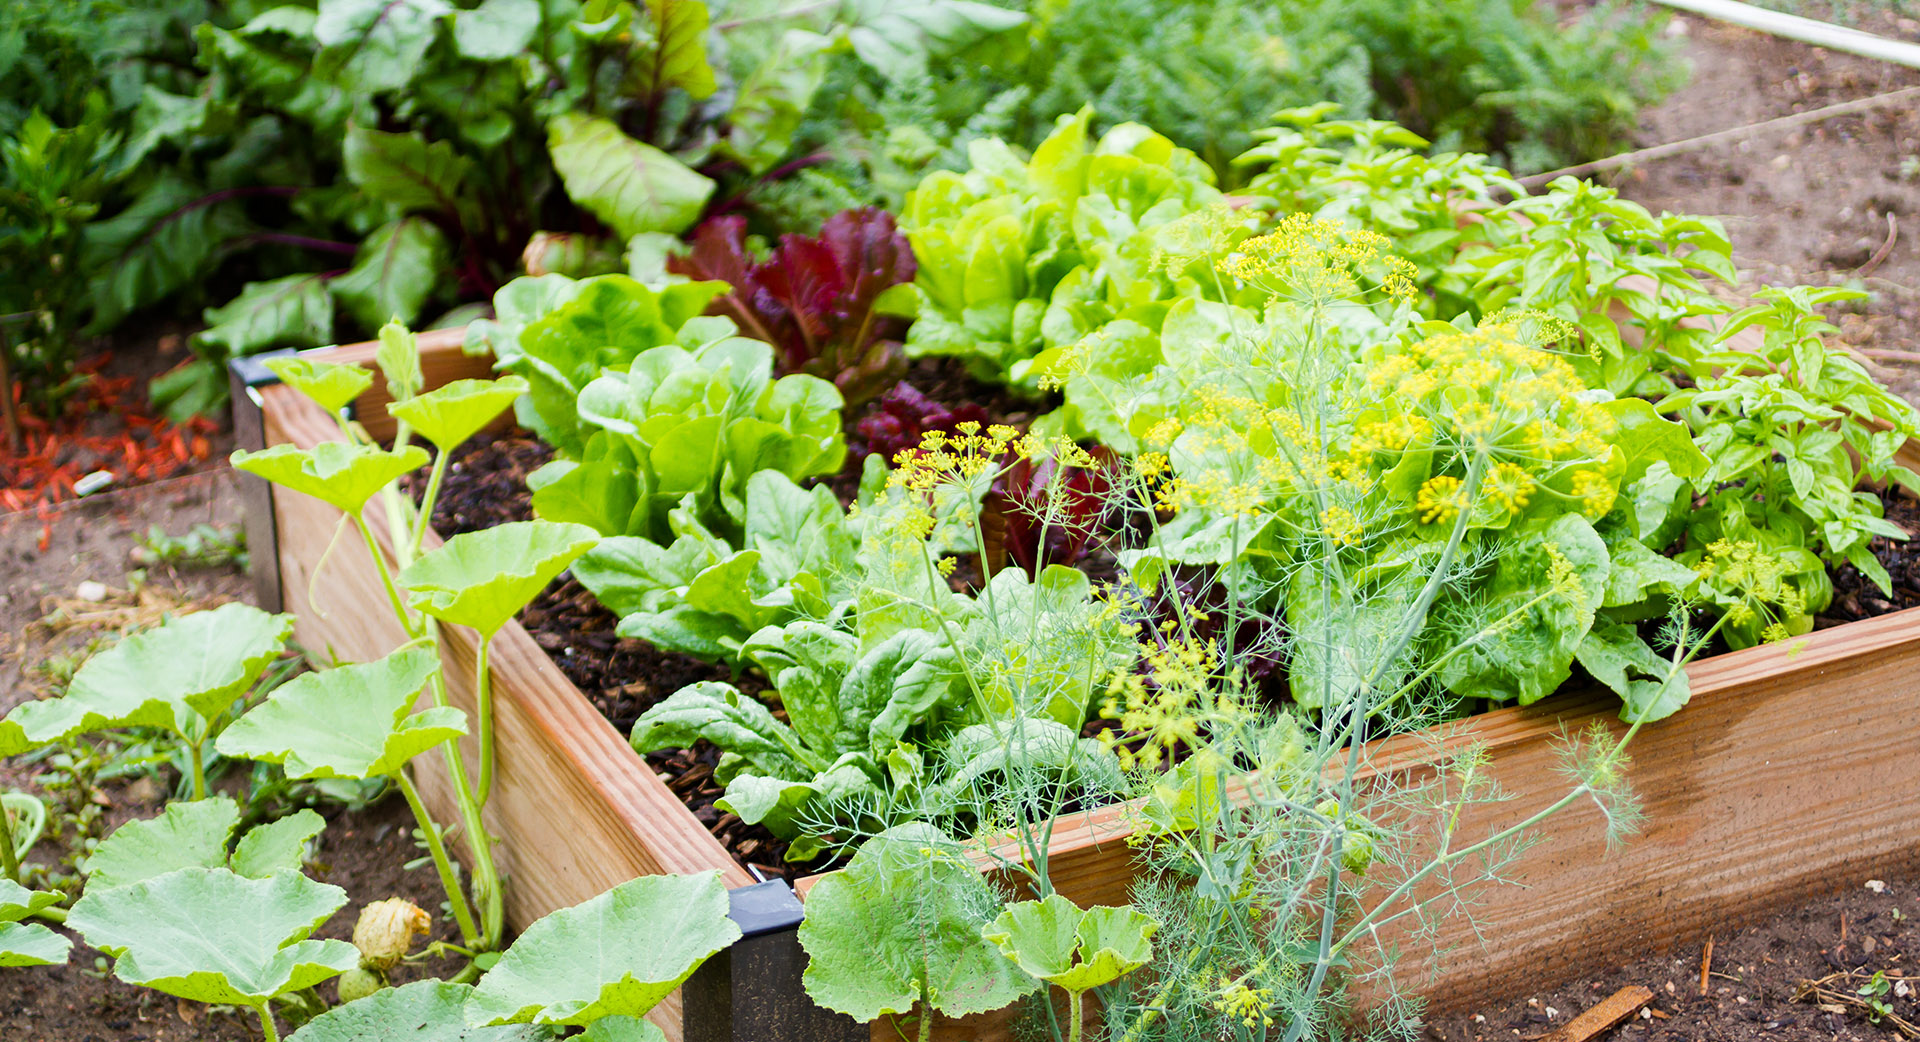 In a raised bed garden, there are green and red lettuce, plus other leafy vegetables growing in abundance.